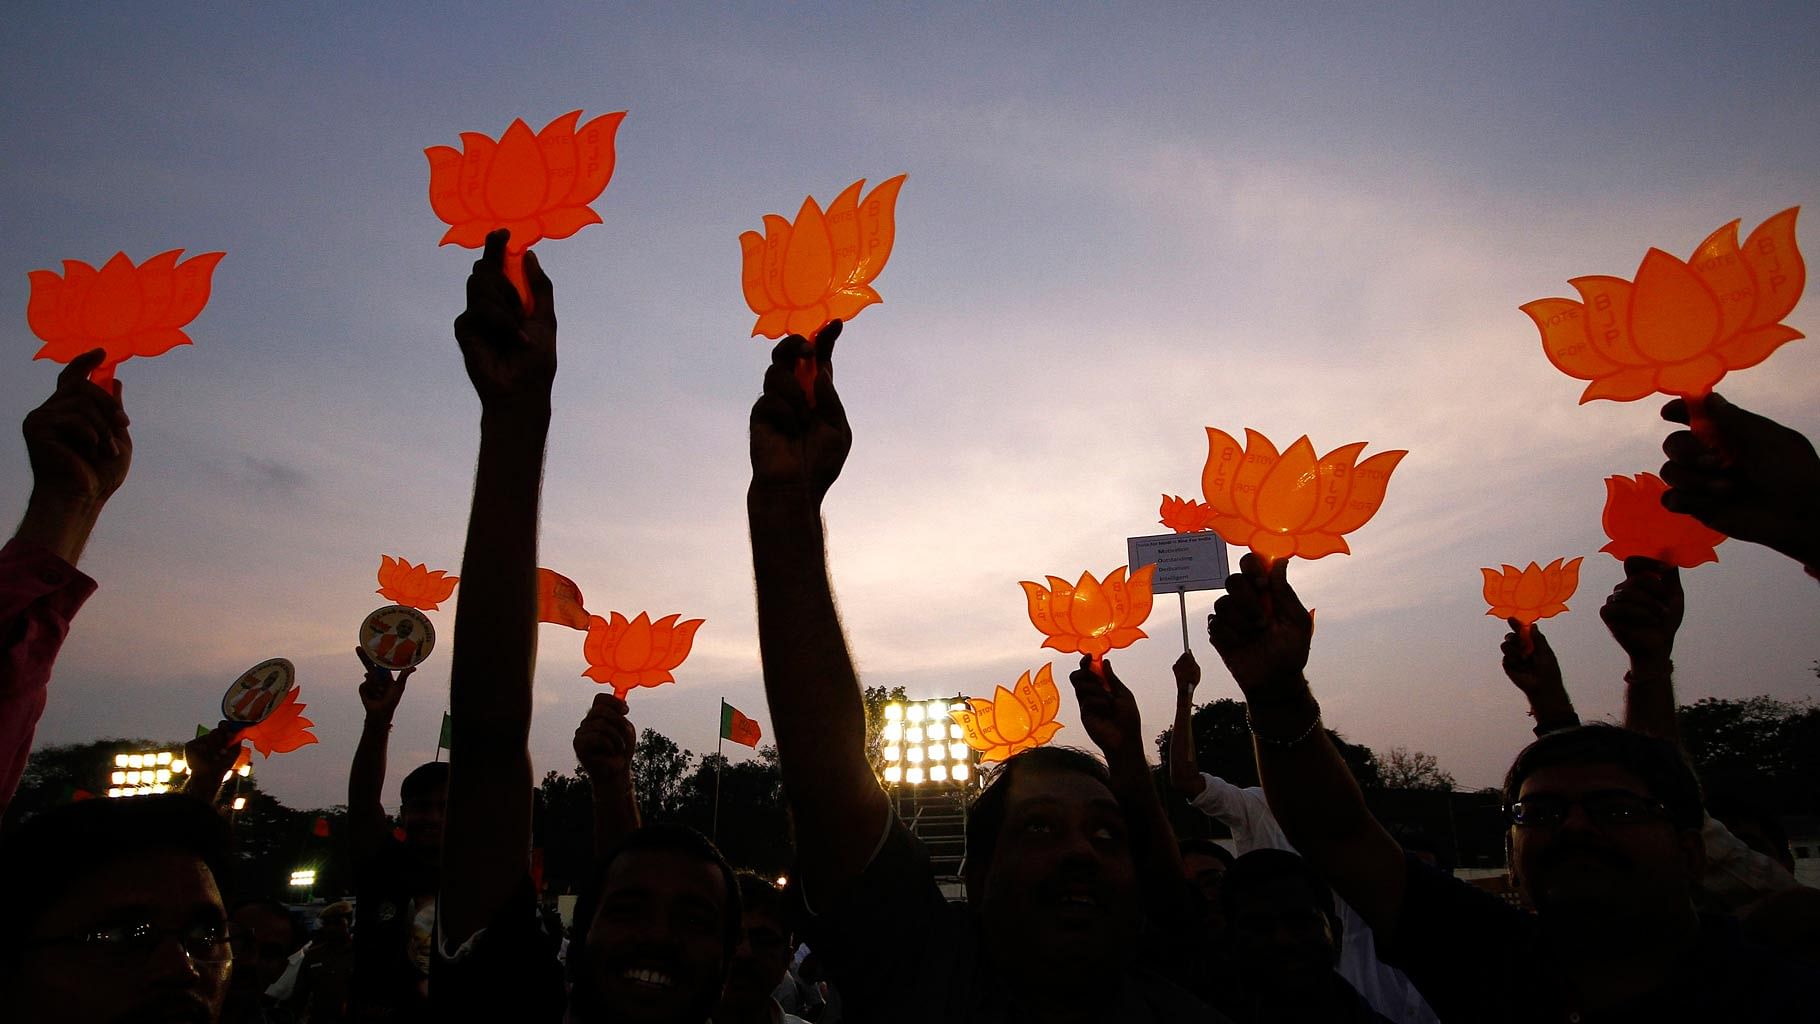 Members of the BJP hold up the party’s symbol at a rally in Chennai. (Photo: Reuters)